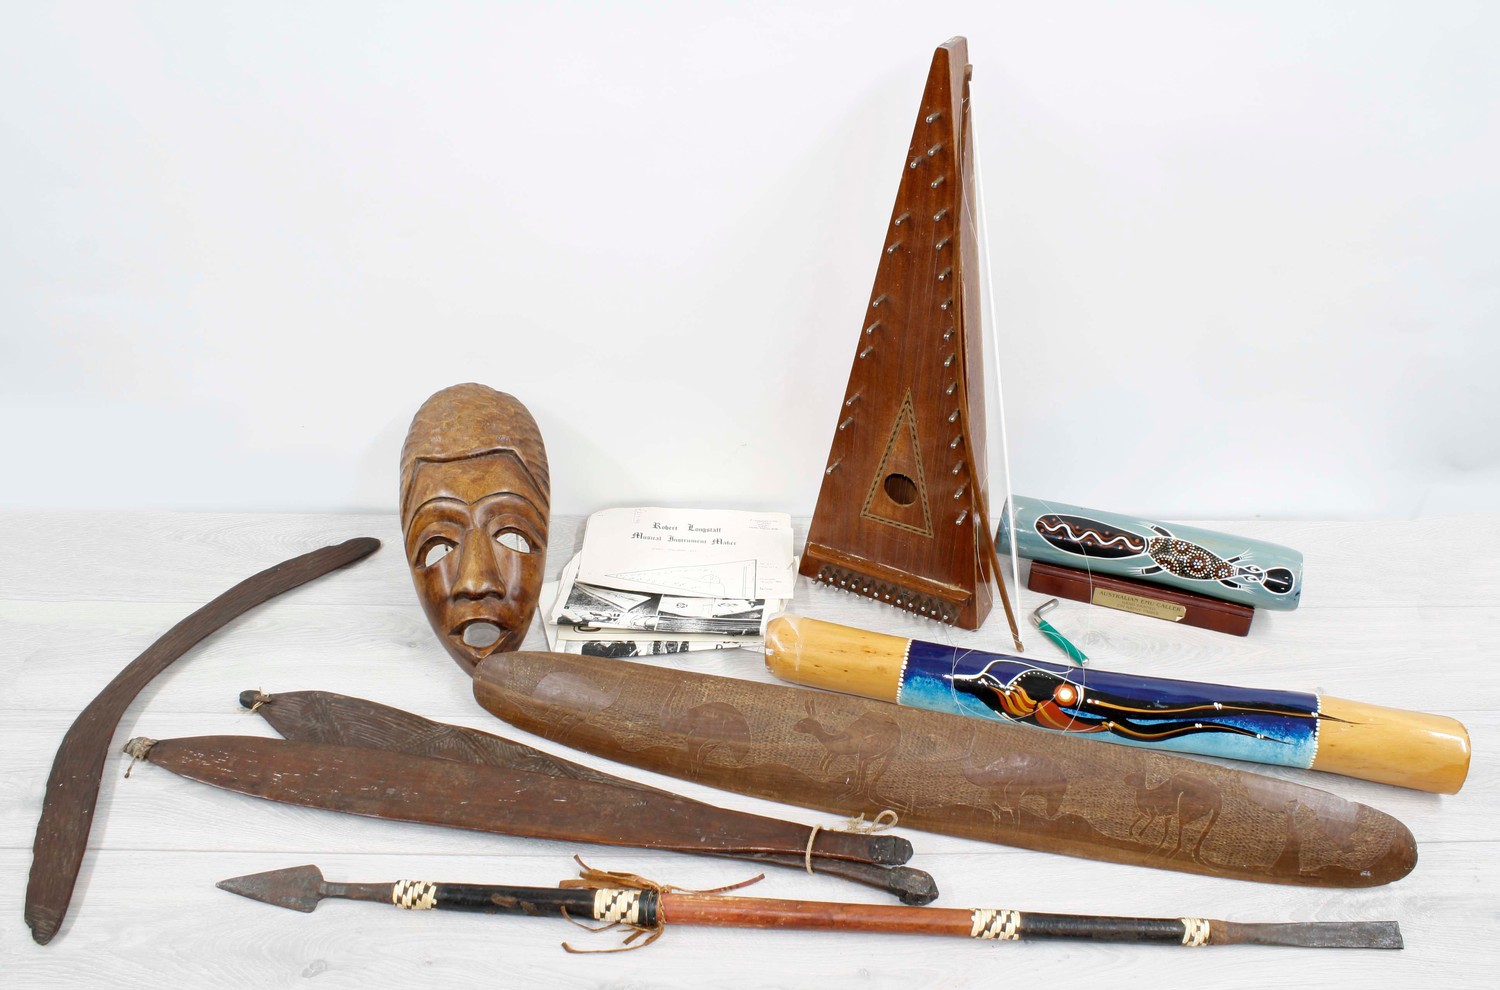 Small selection of African and ethnic musical instruments, African spear, tribal shield, mask and